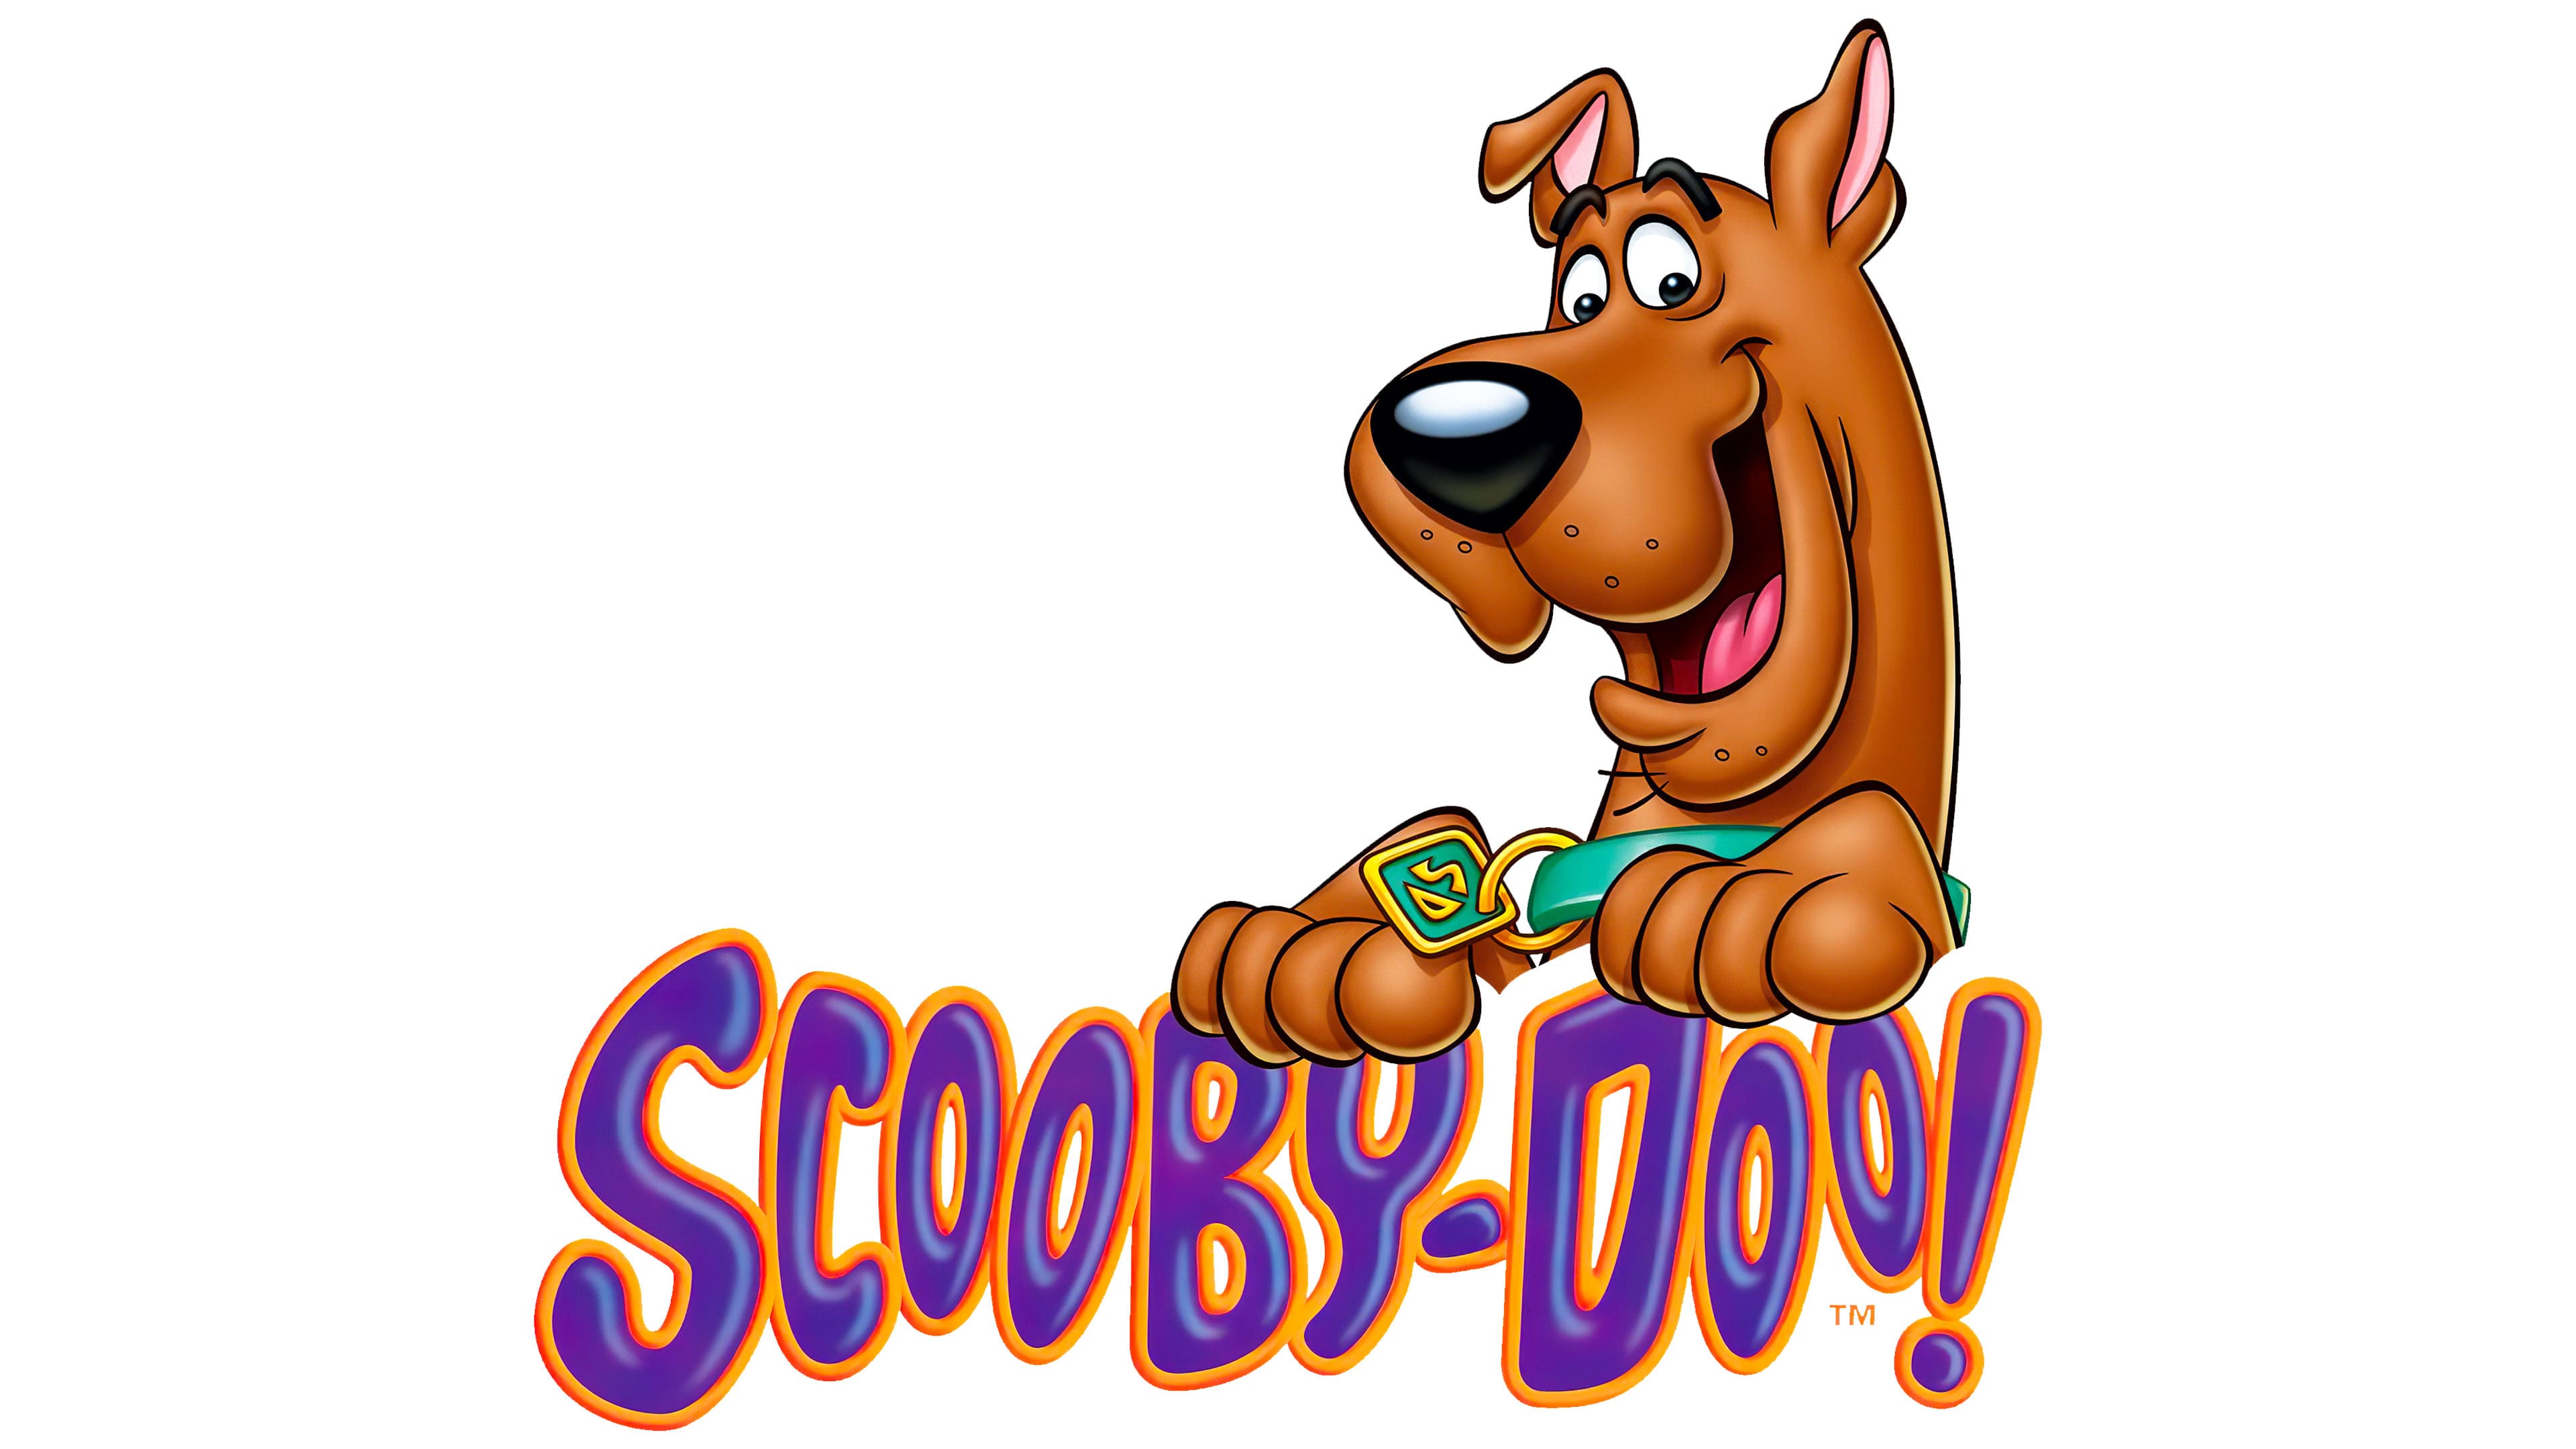 Scooby Doo Logo, symbol, meaning, history, PNG, brand